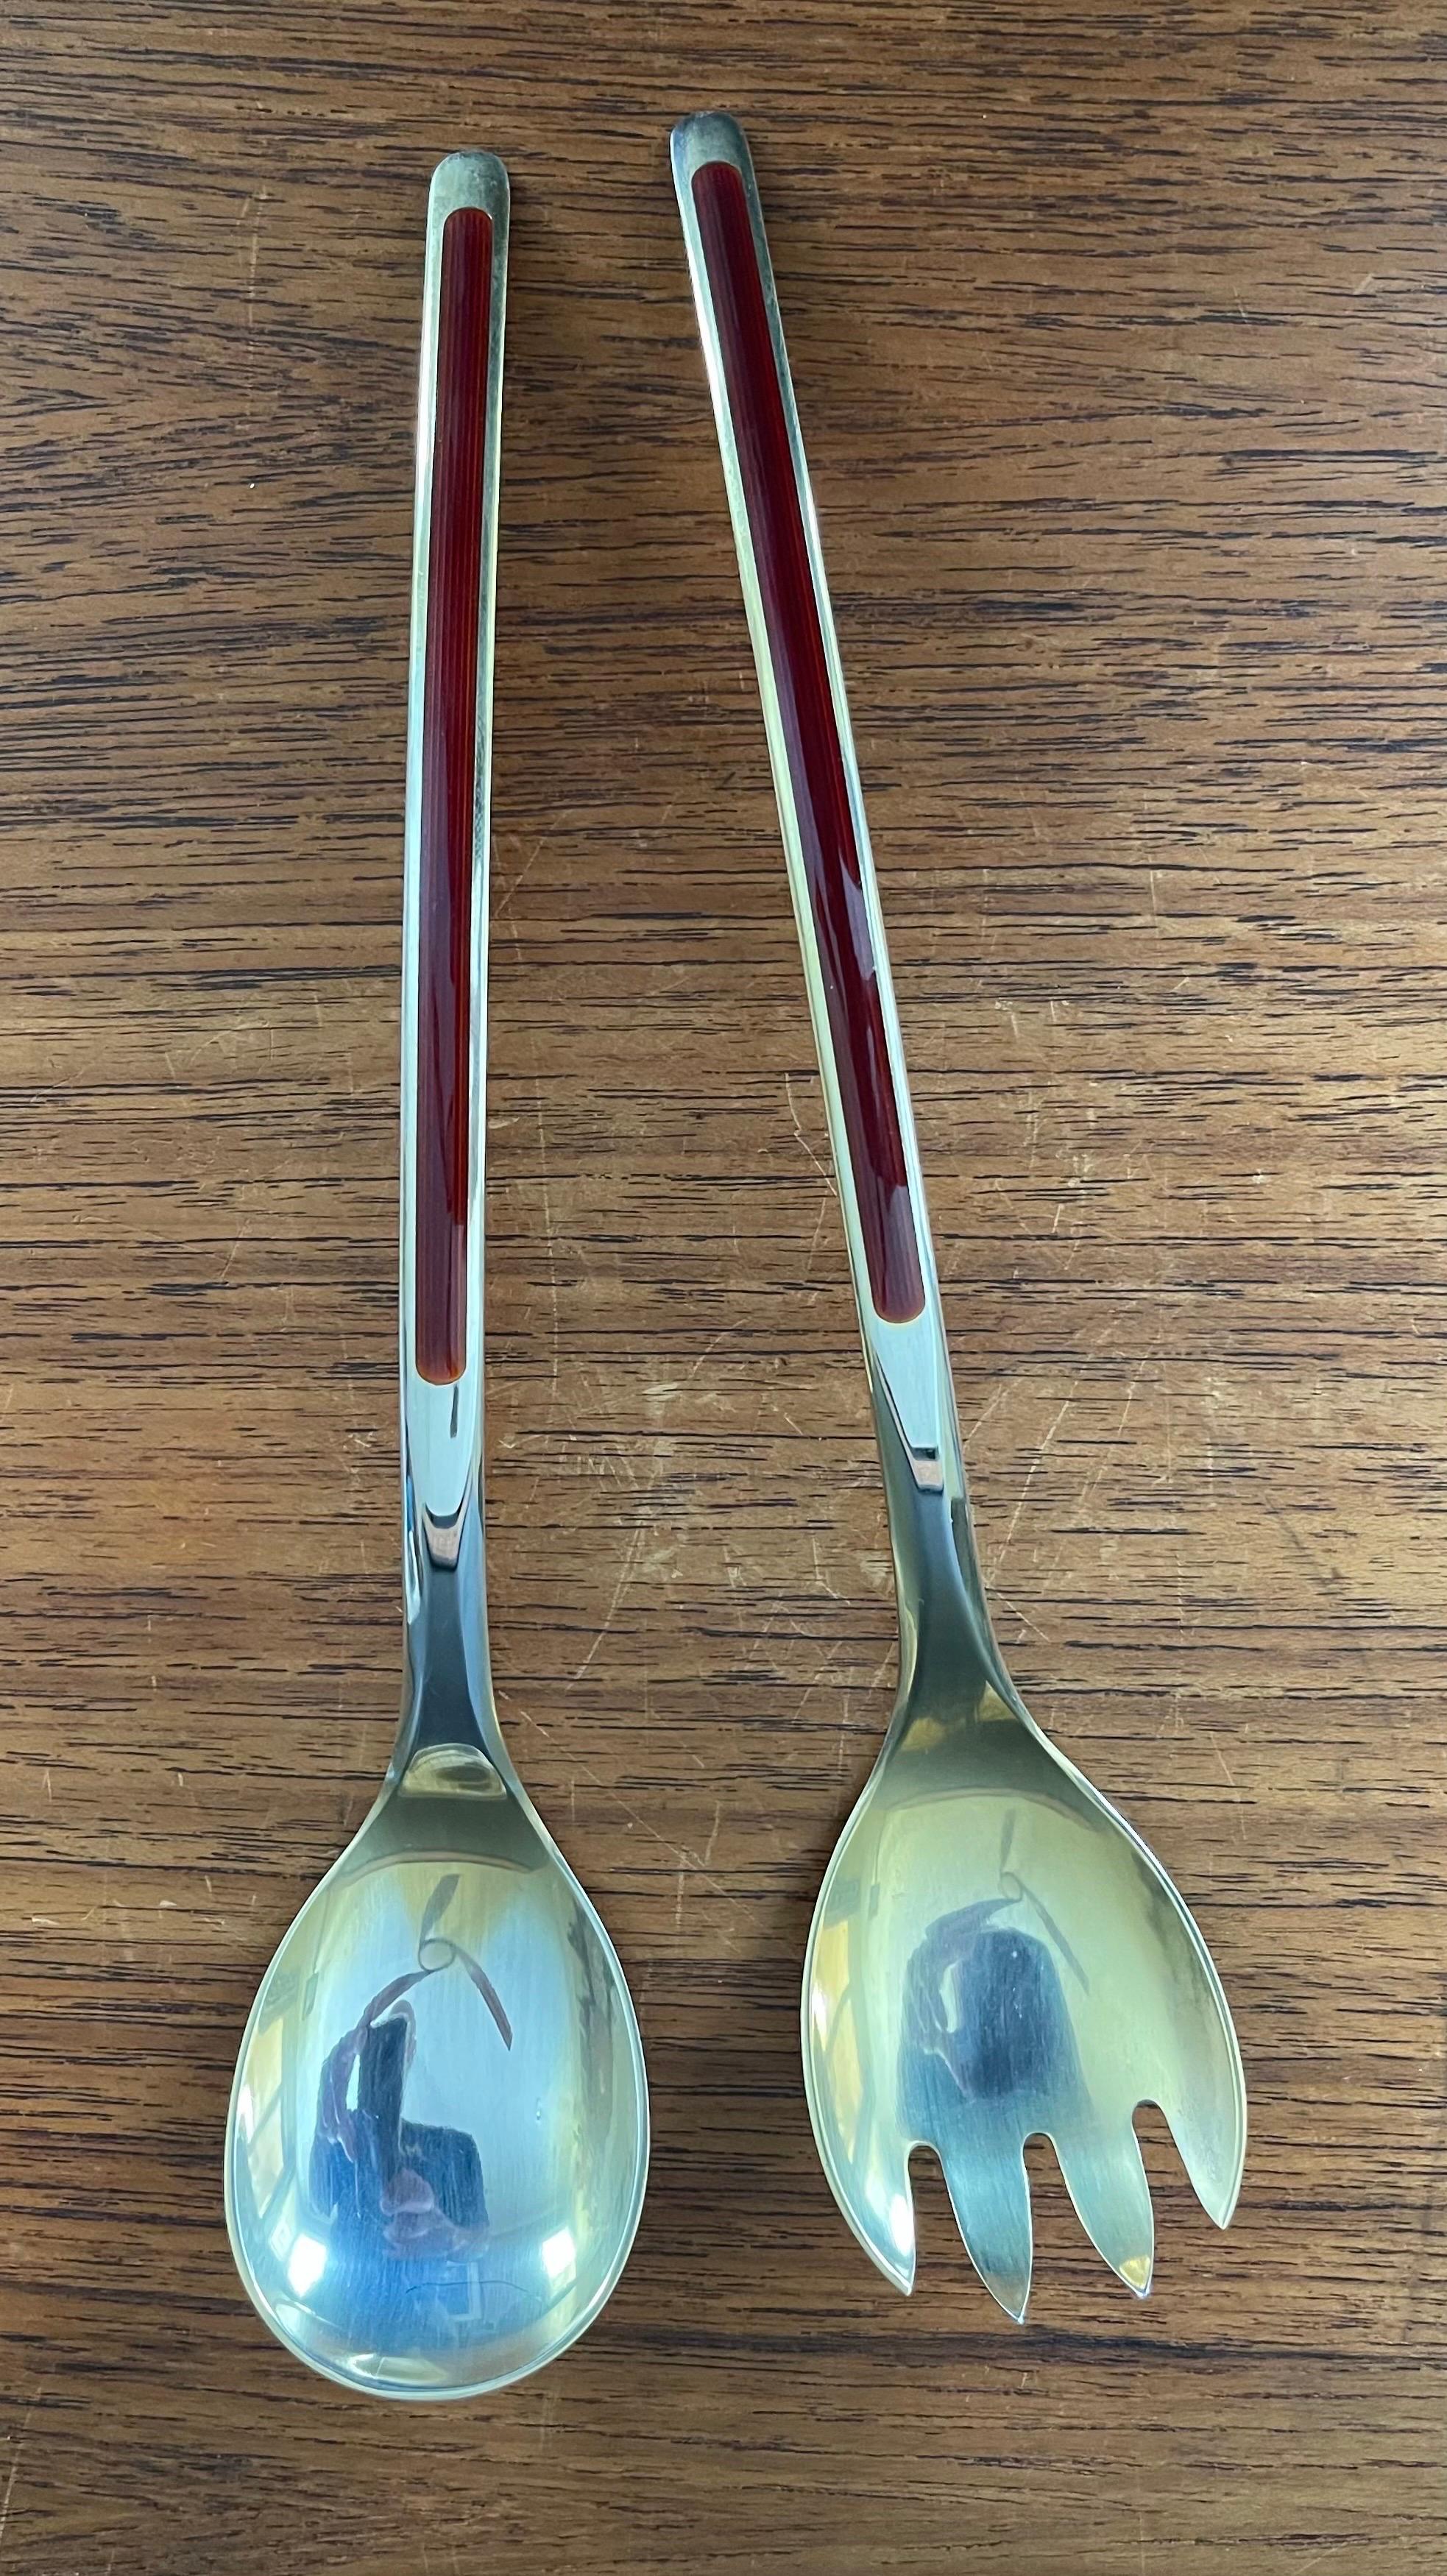 MCM Stylized Set of Salad Servers in Sterling Silver and Enamel by N.M. Thune For Sale 1